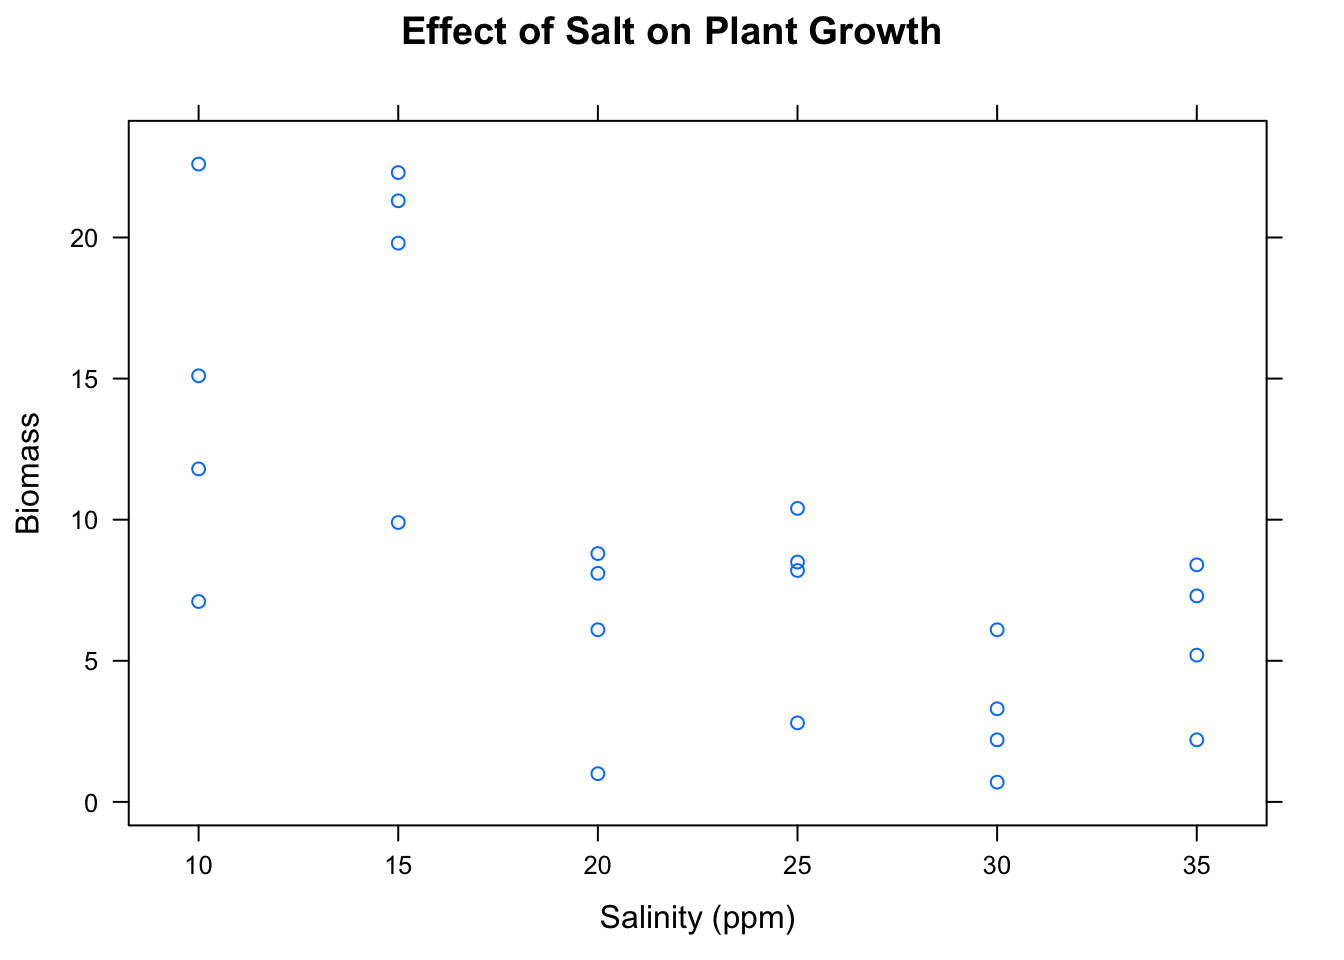 Biomass and Salinity.  The higher the concentration of salt, the lower the biomass in the plot.